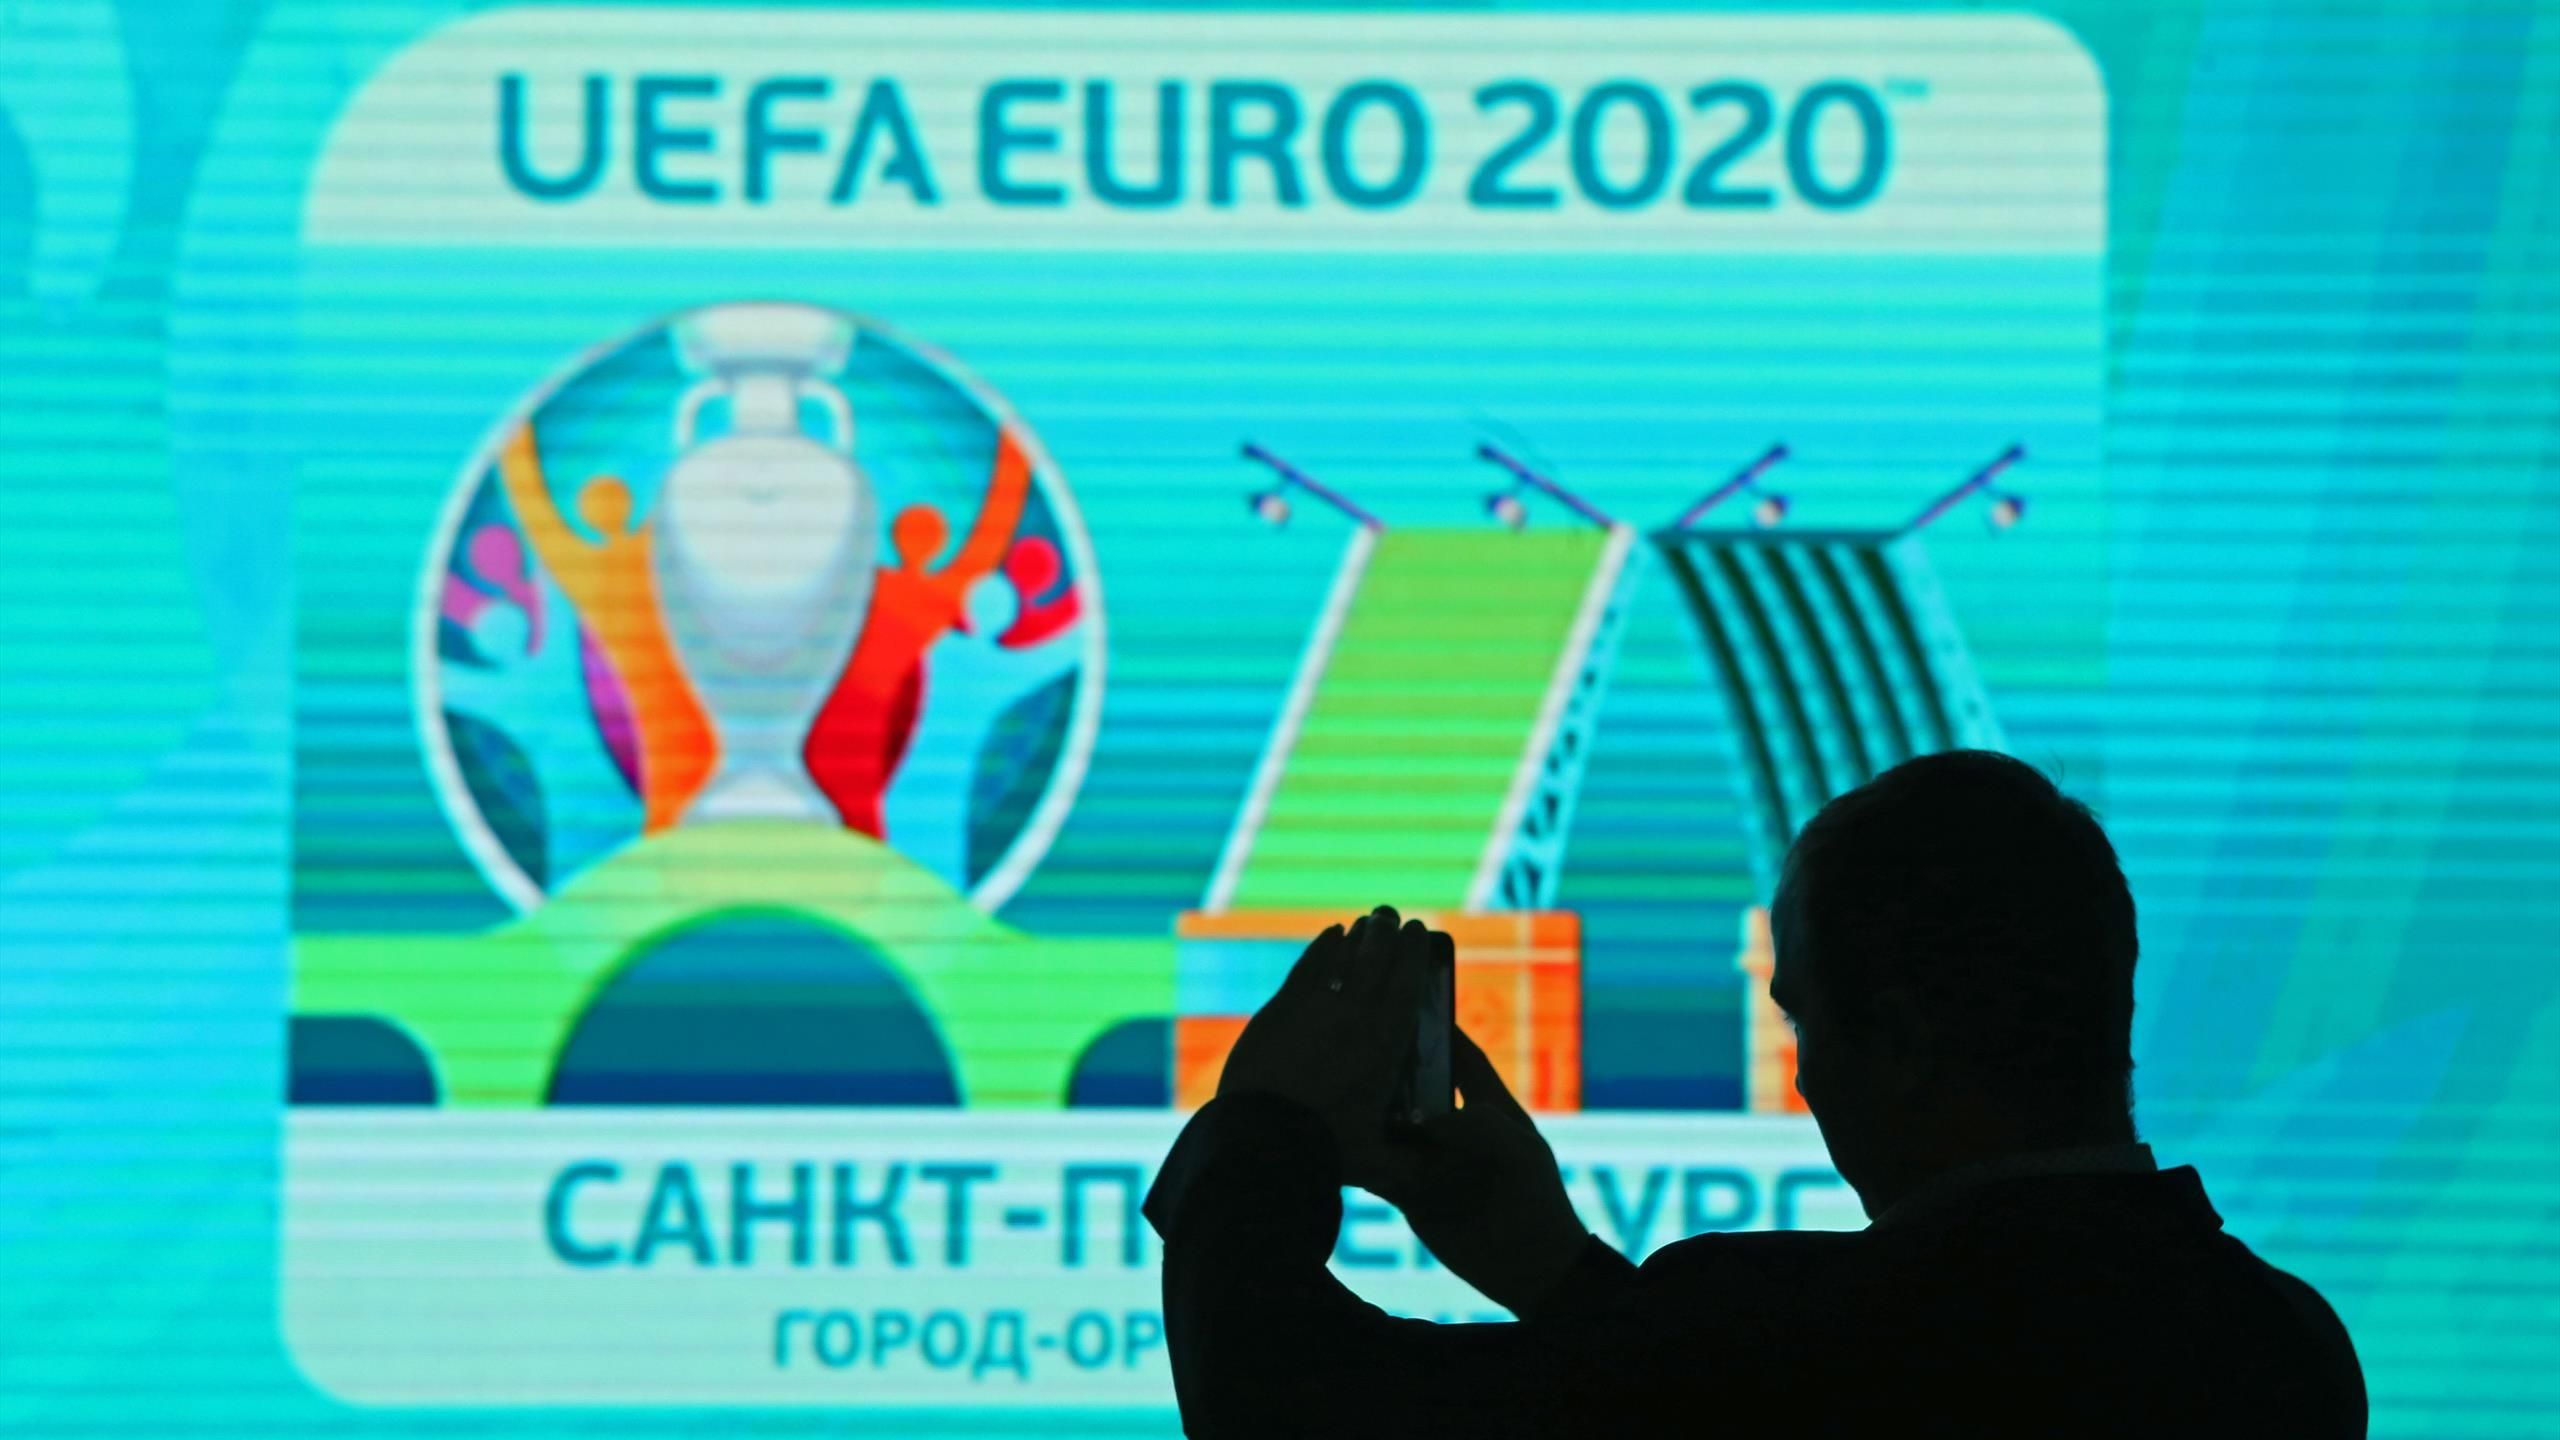 Coronavirus: What does Euro 2020 postponement until 2021 mean for football and fans?